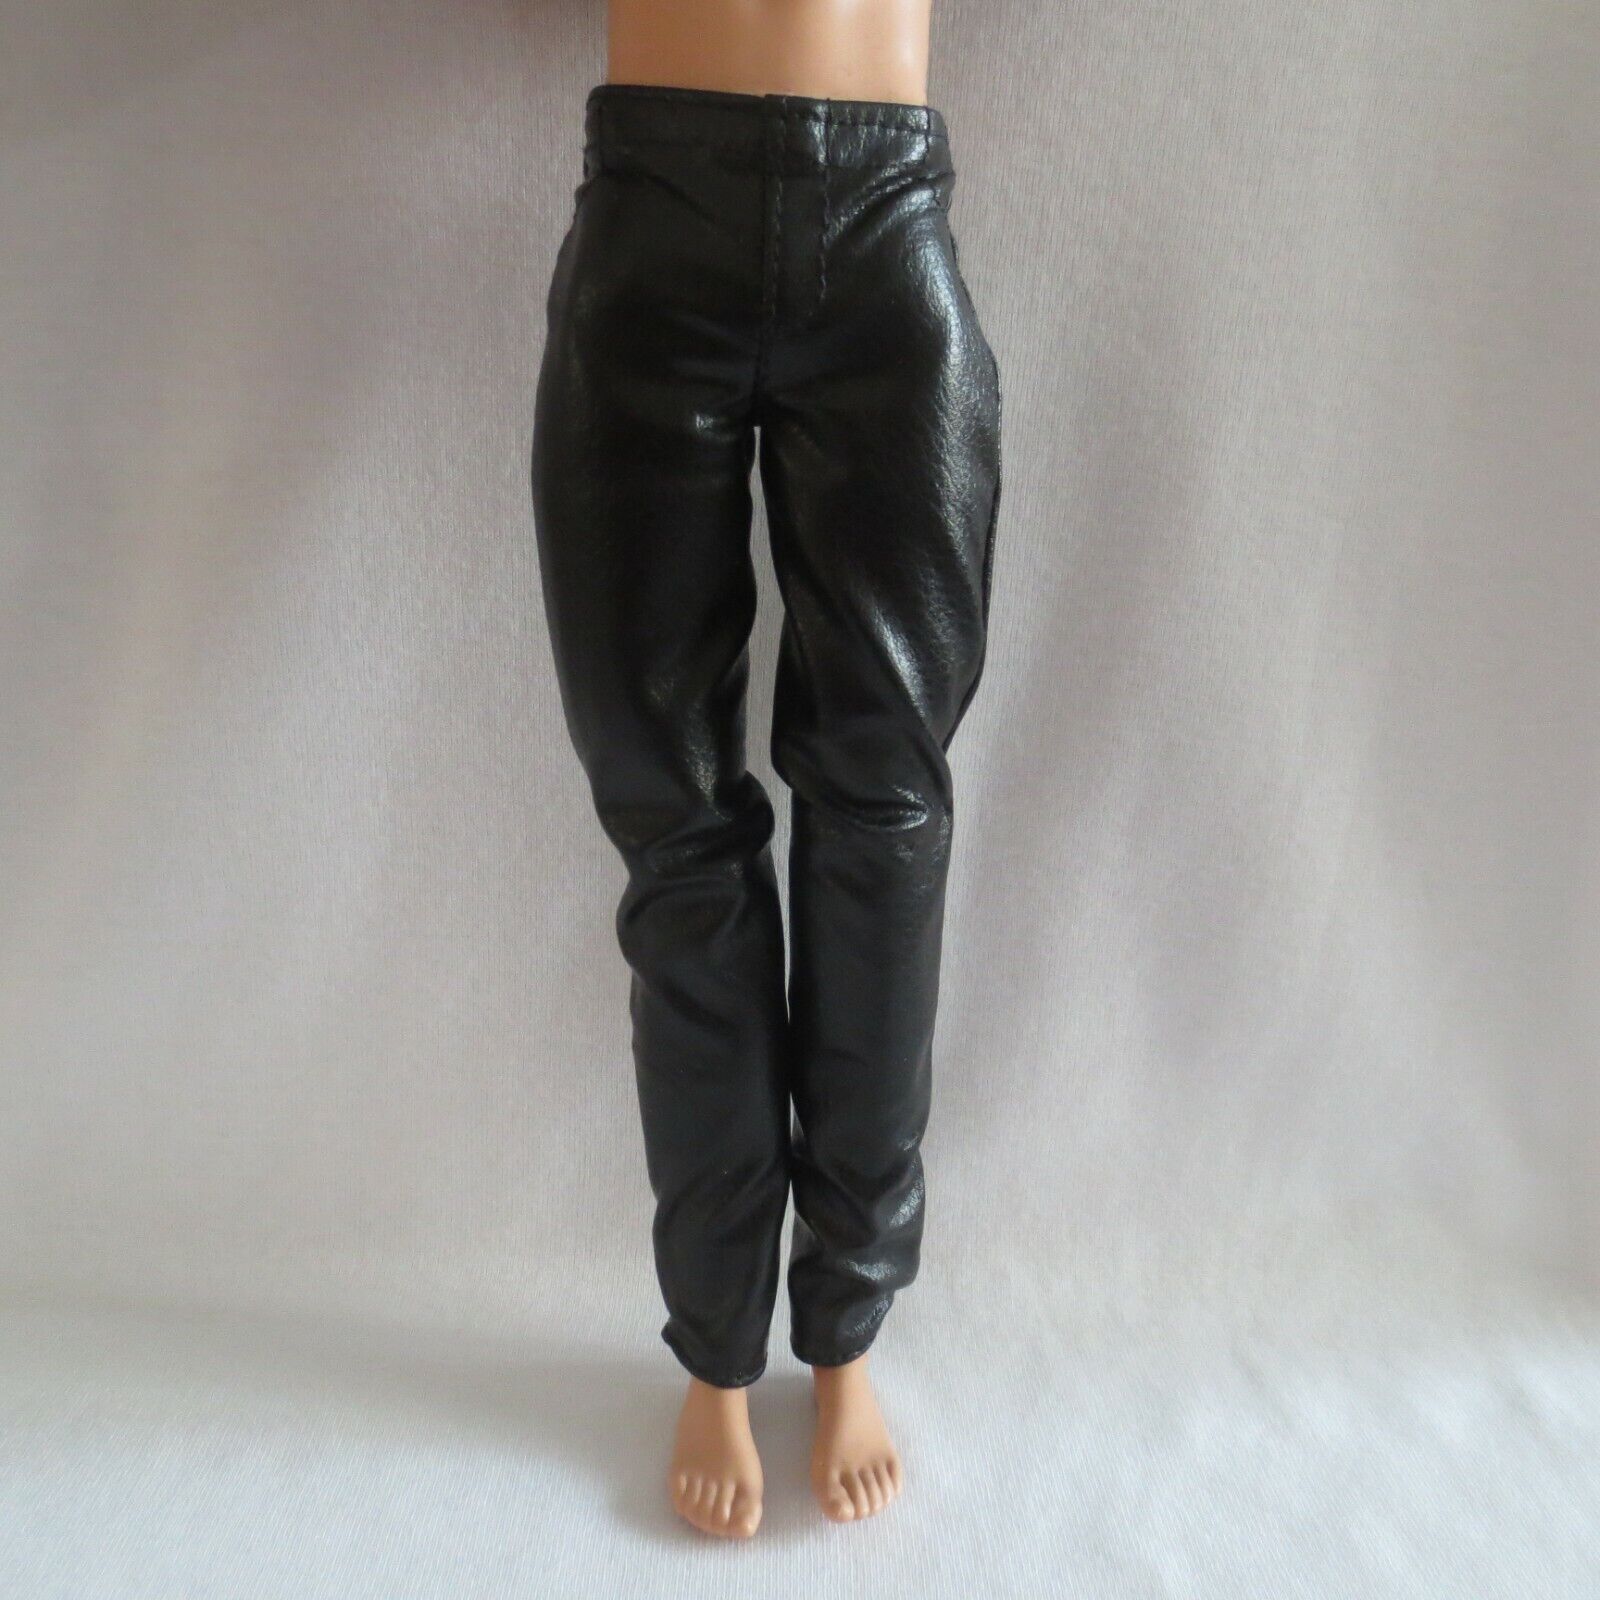 NEW 2021 Barbie Signature Looks Made To Move Ken Doll Black Faux Leather Pants